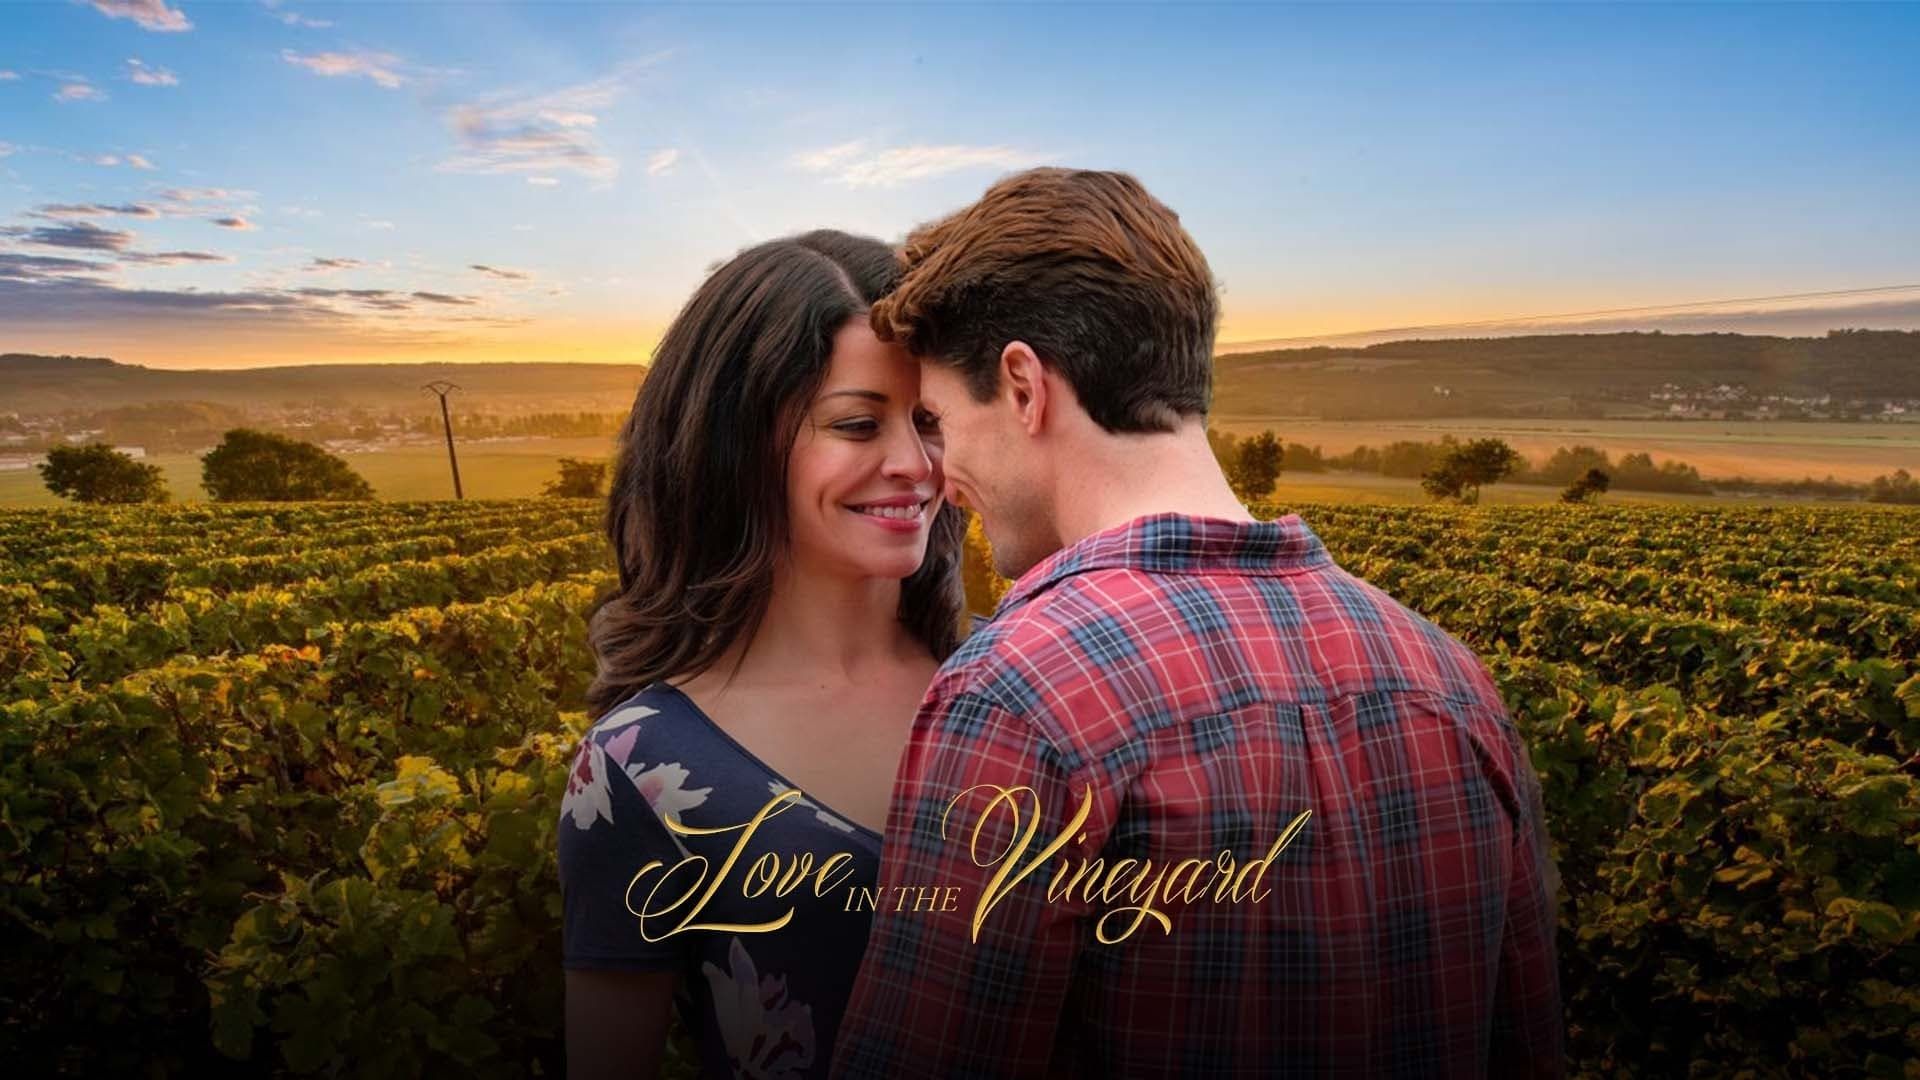 Love in the Vineyard background